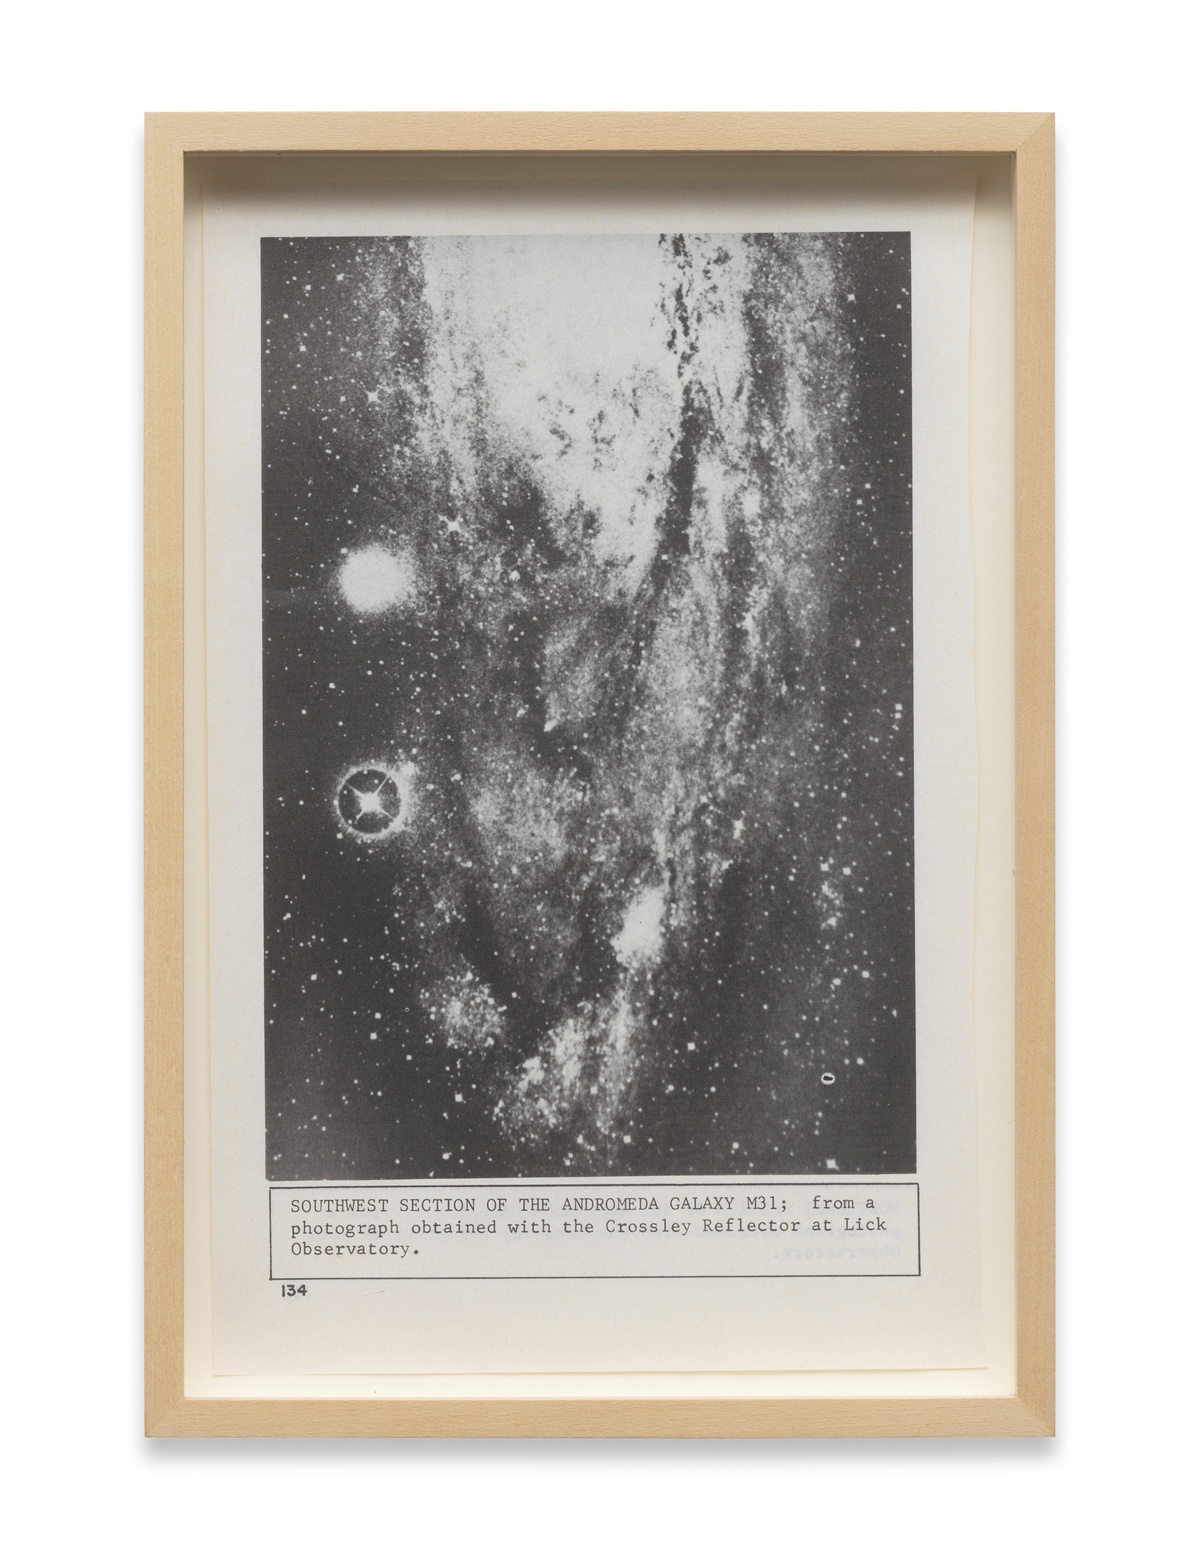 Lutz BacherThe Celestial Handbook, 2011one of 85 framed offset printed book pages 25.5 x 17.5 cm | 10 x 7 in